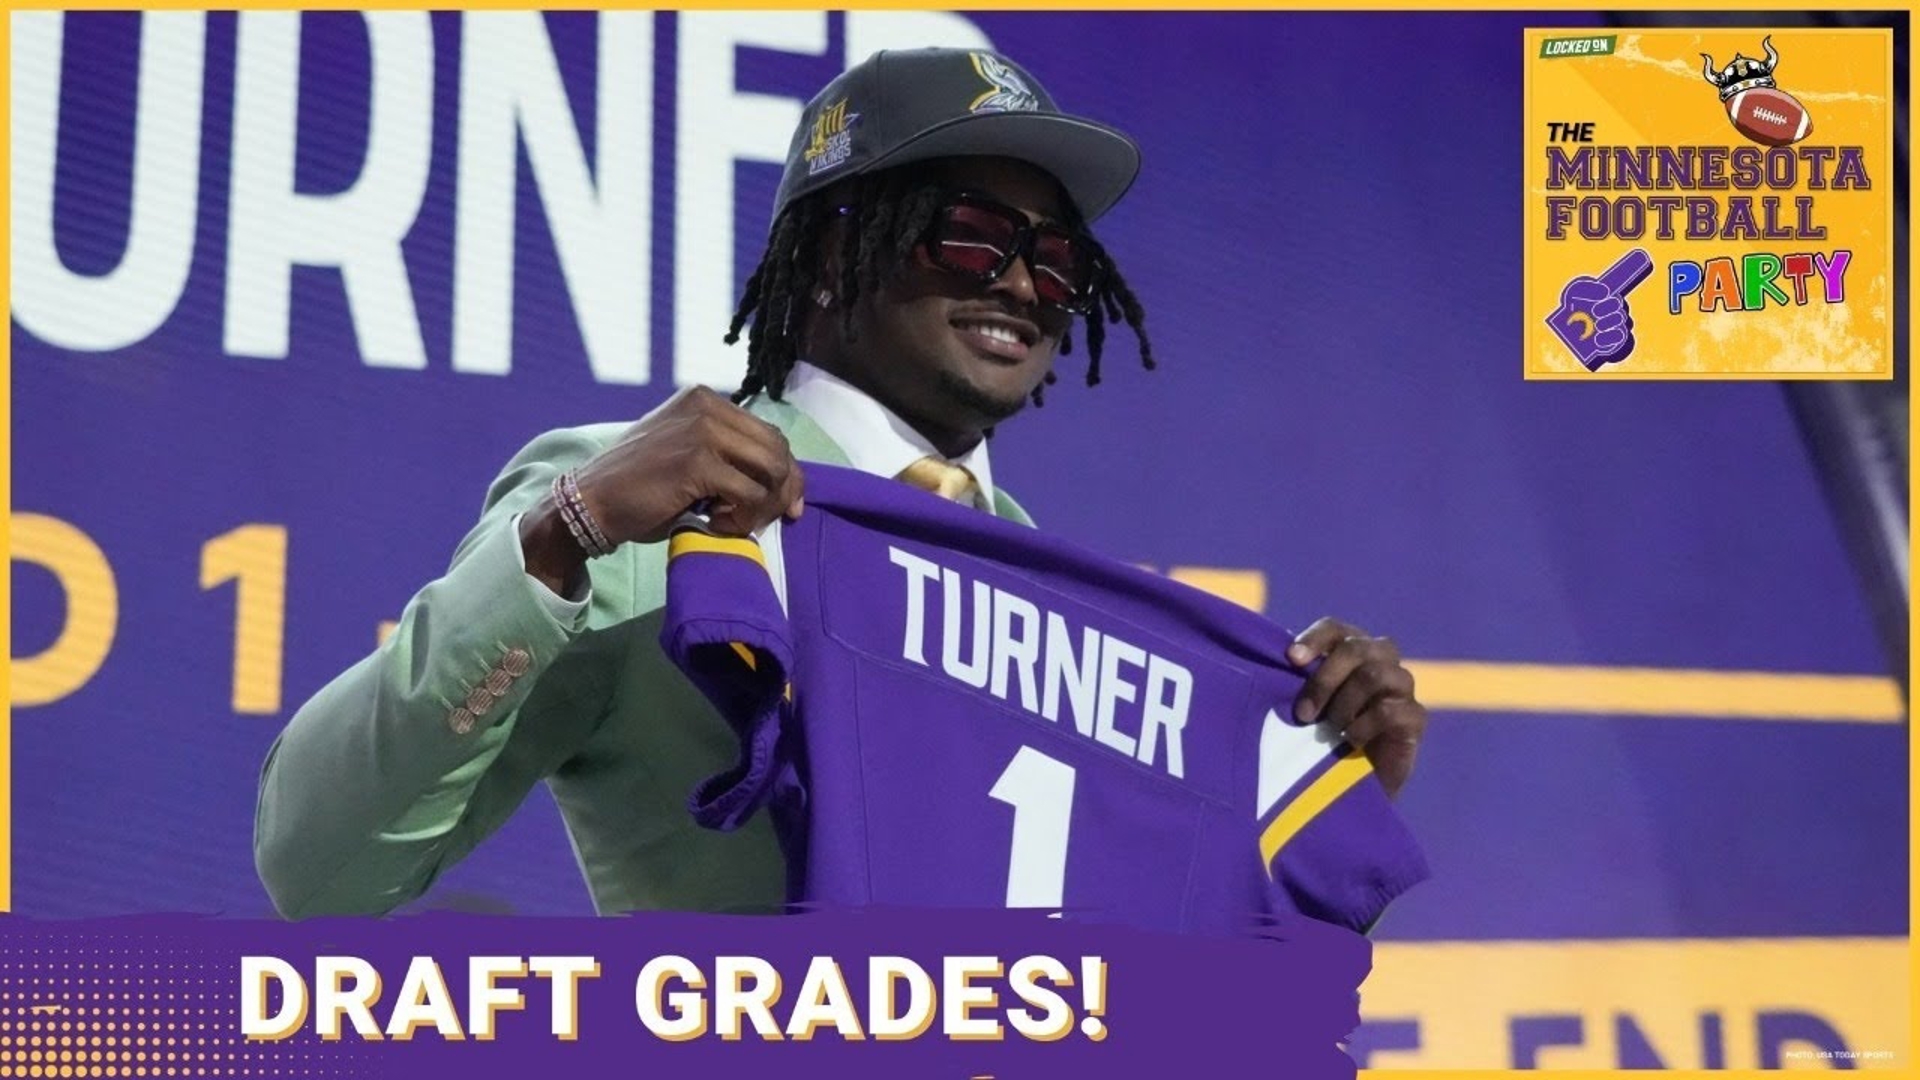 The Minnesota Vikings draft is in the books. J.J. McCarthy is the new franchise quarterback, and Dallas Turner was a dynamic choice at No. 17.